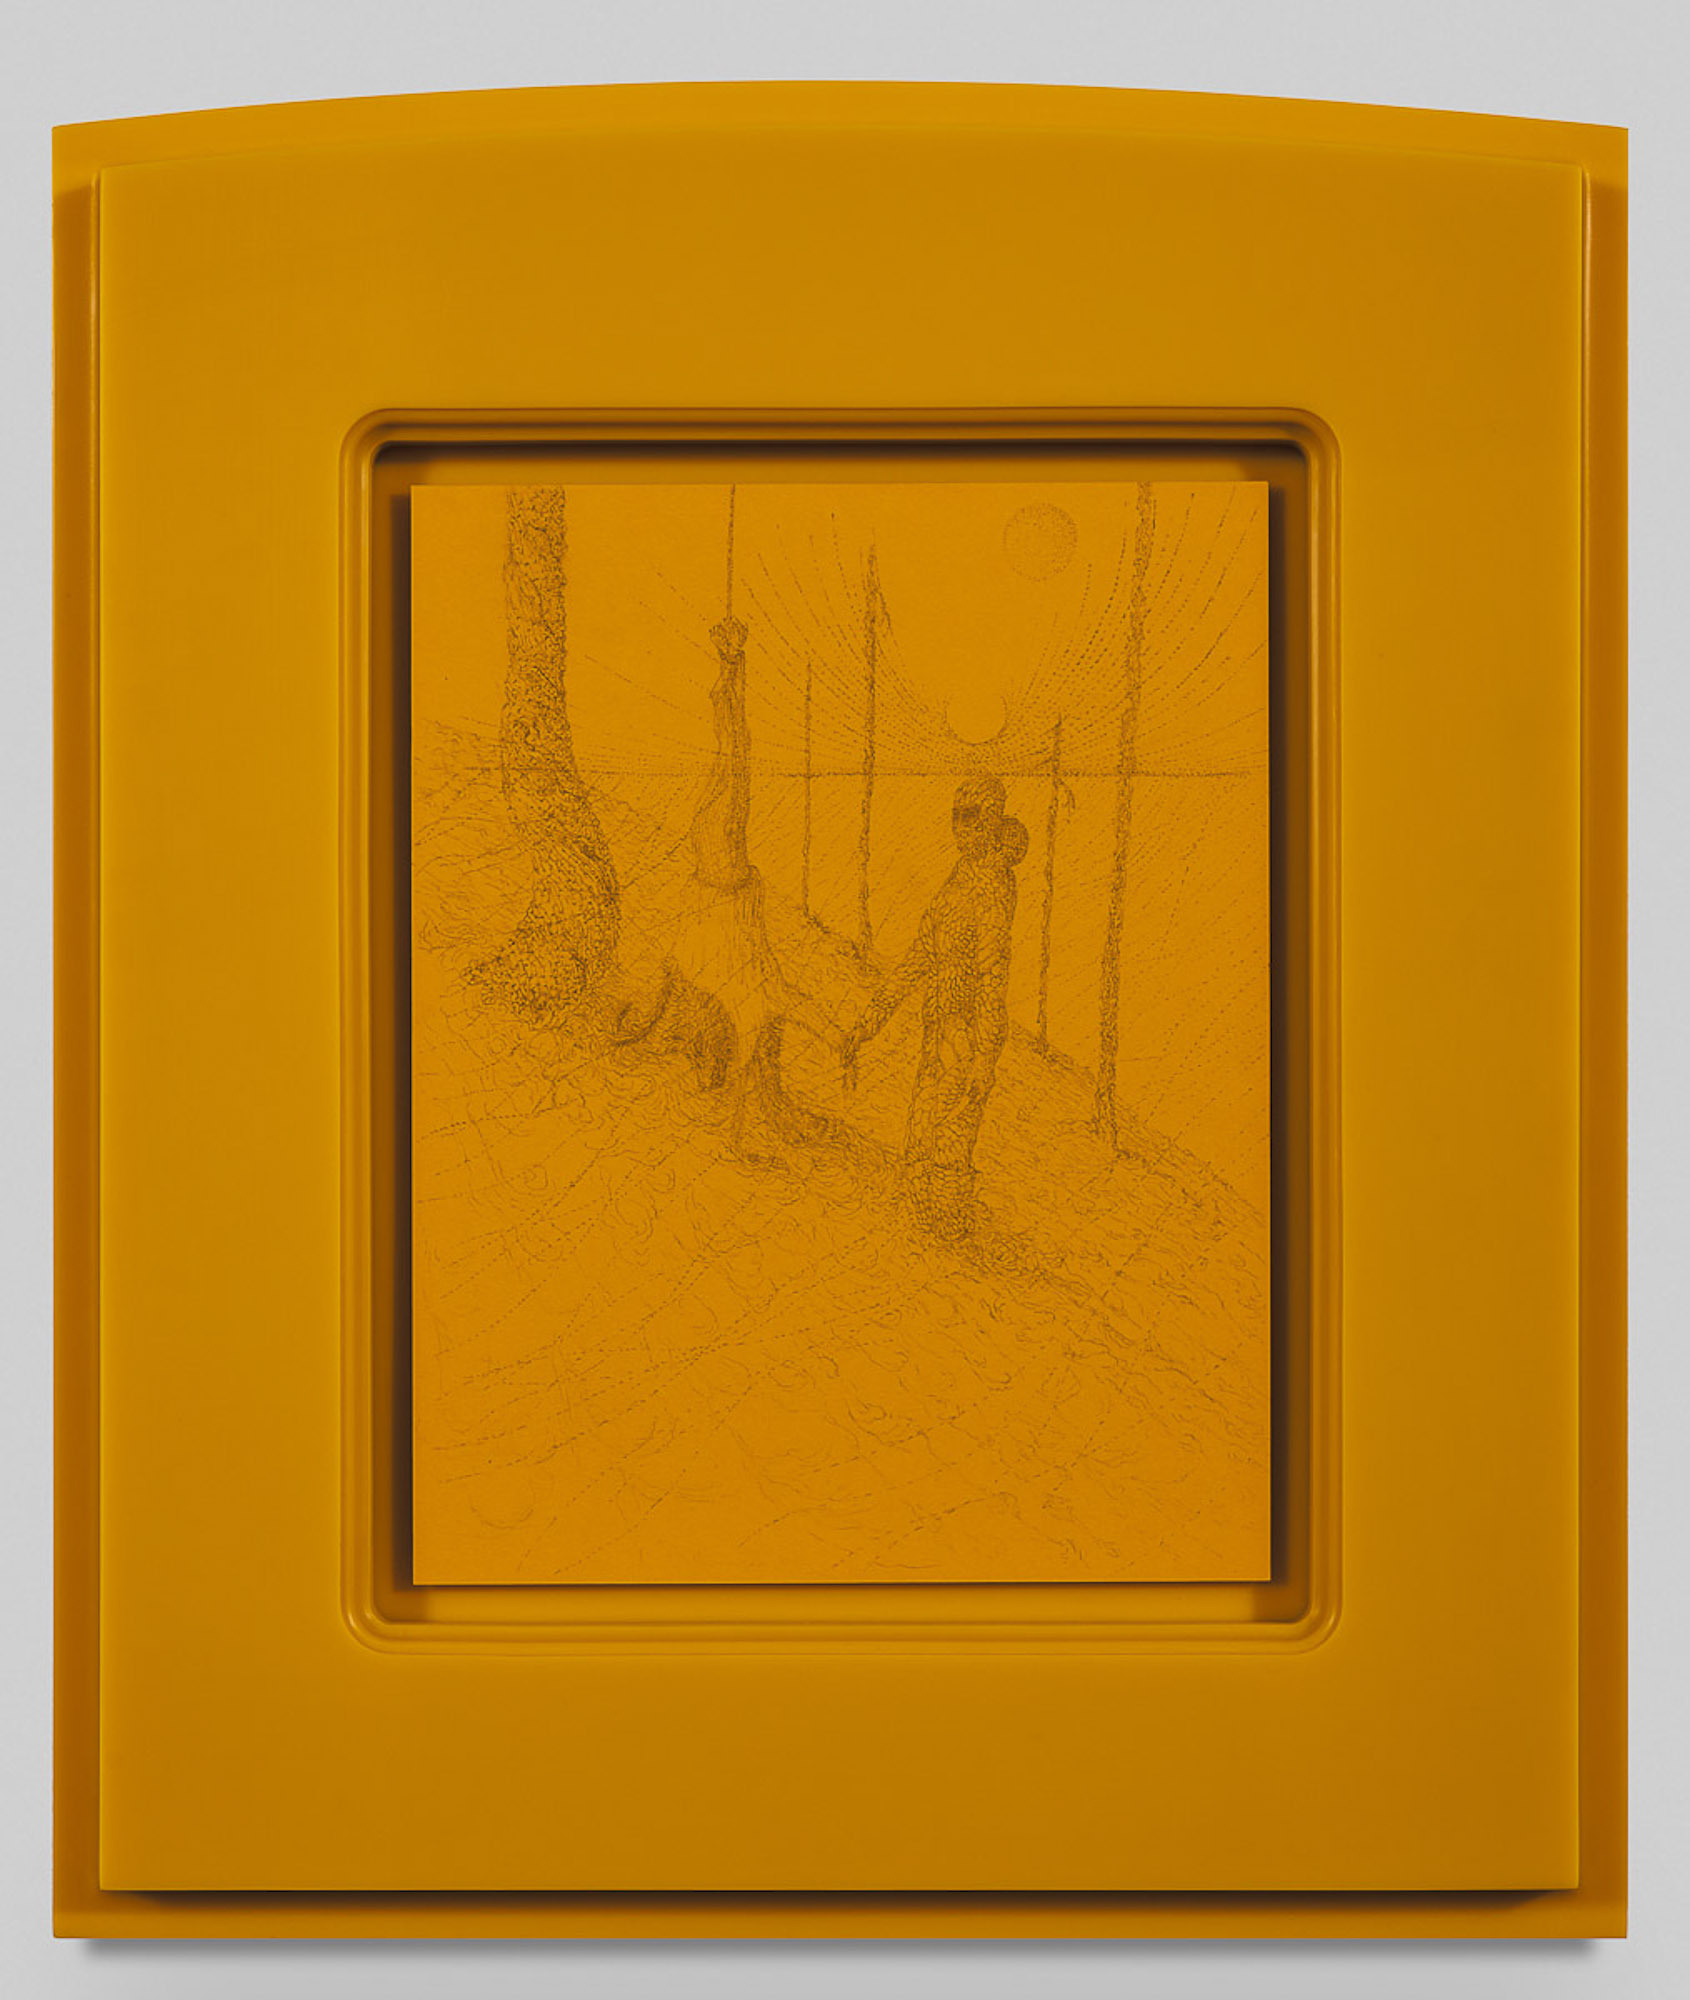 <i>Fascia</i>, 2019<br>Graphite on paper in ultra high molecular weight plastic frame<br>21 1/8 x 17 7/8 x 1 3/8 inches (53.7 x 45.4 x 3.5 cm) framed